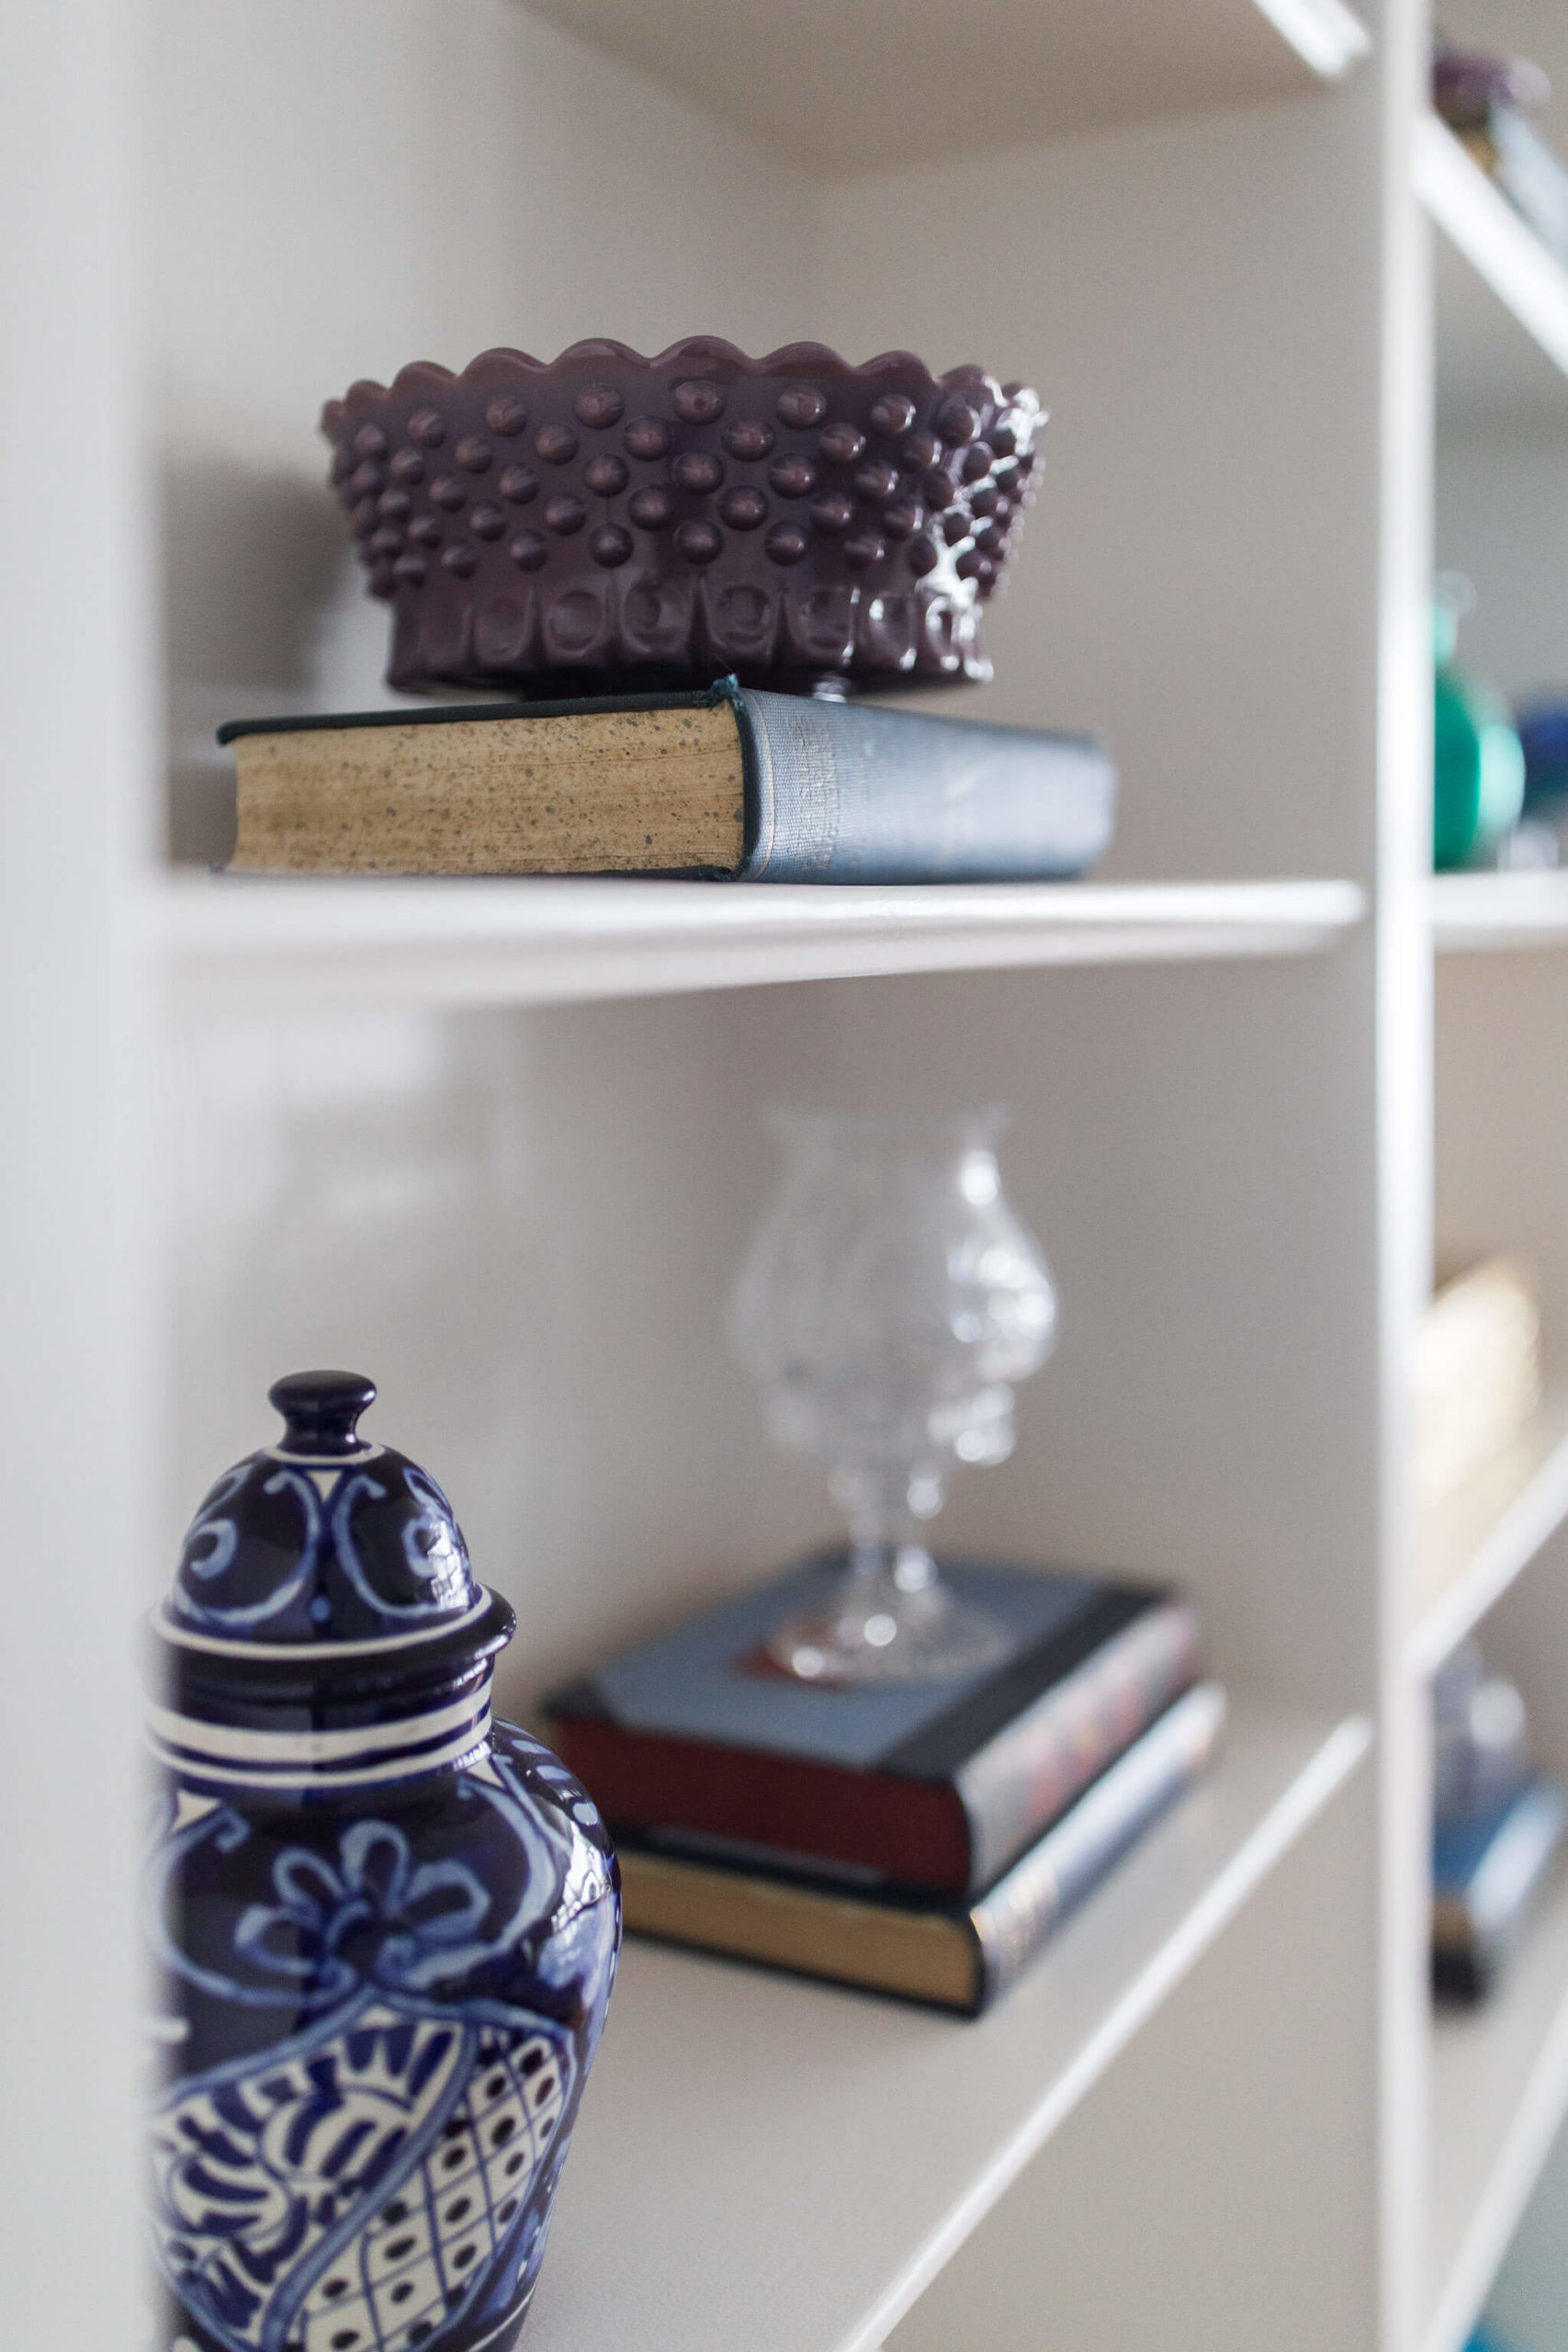 Family Room Built-in Shelves After Eclectic Interiors with accessories like purple hobnial glassware